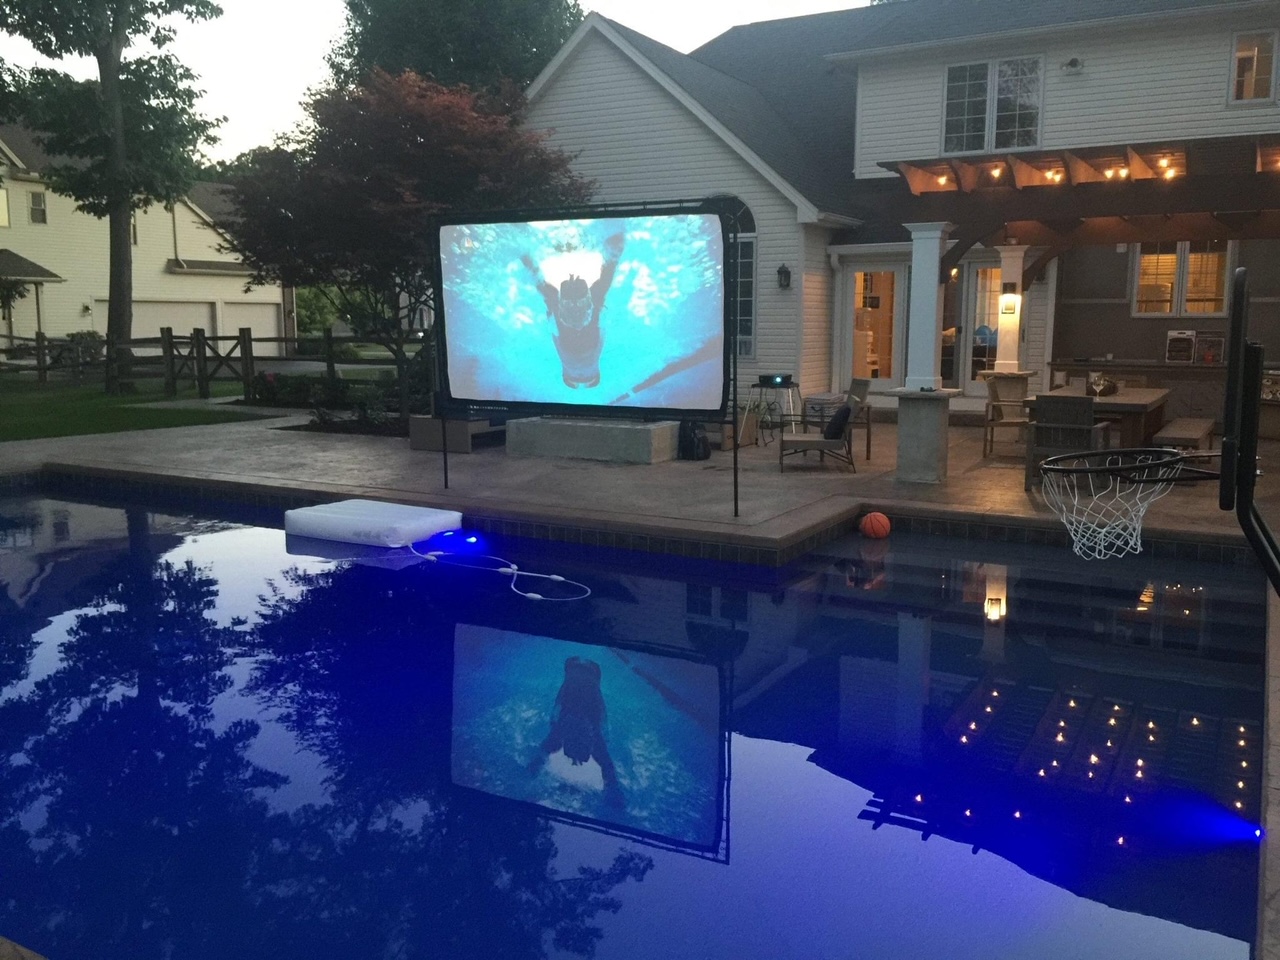 Planning Ahead for your Backyard Theater